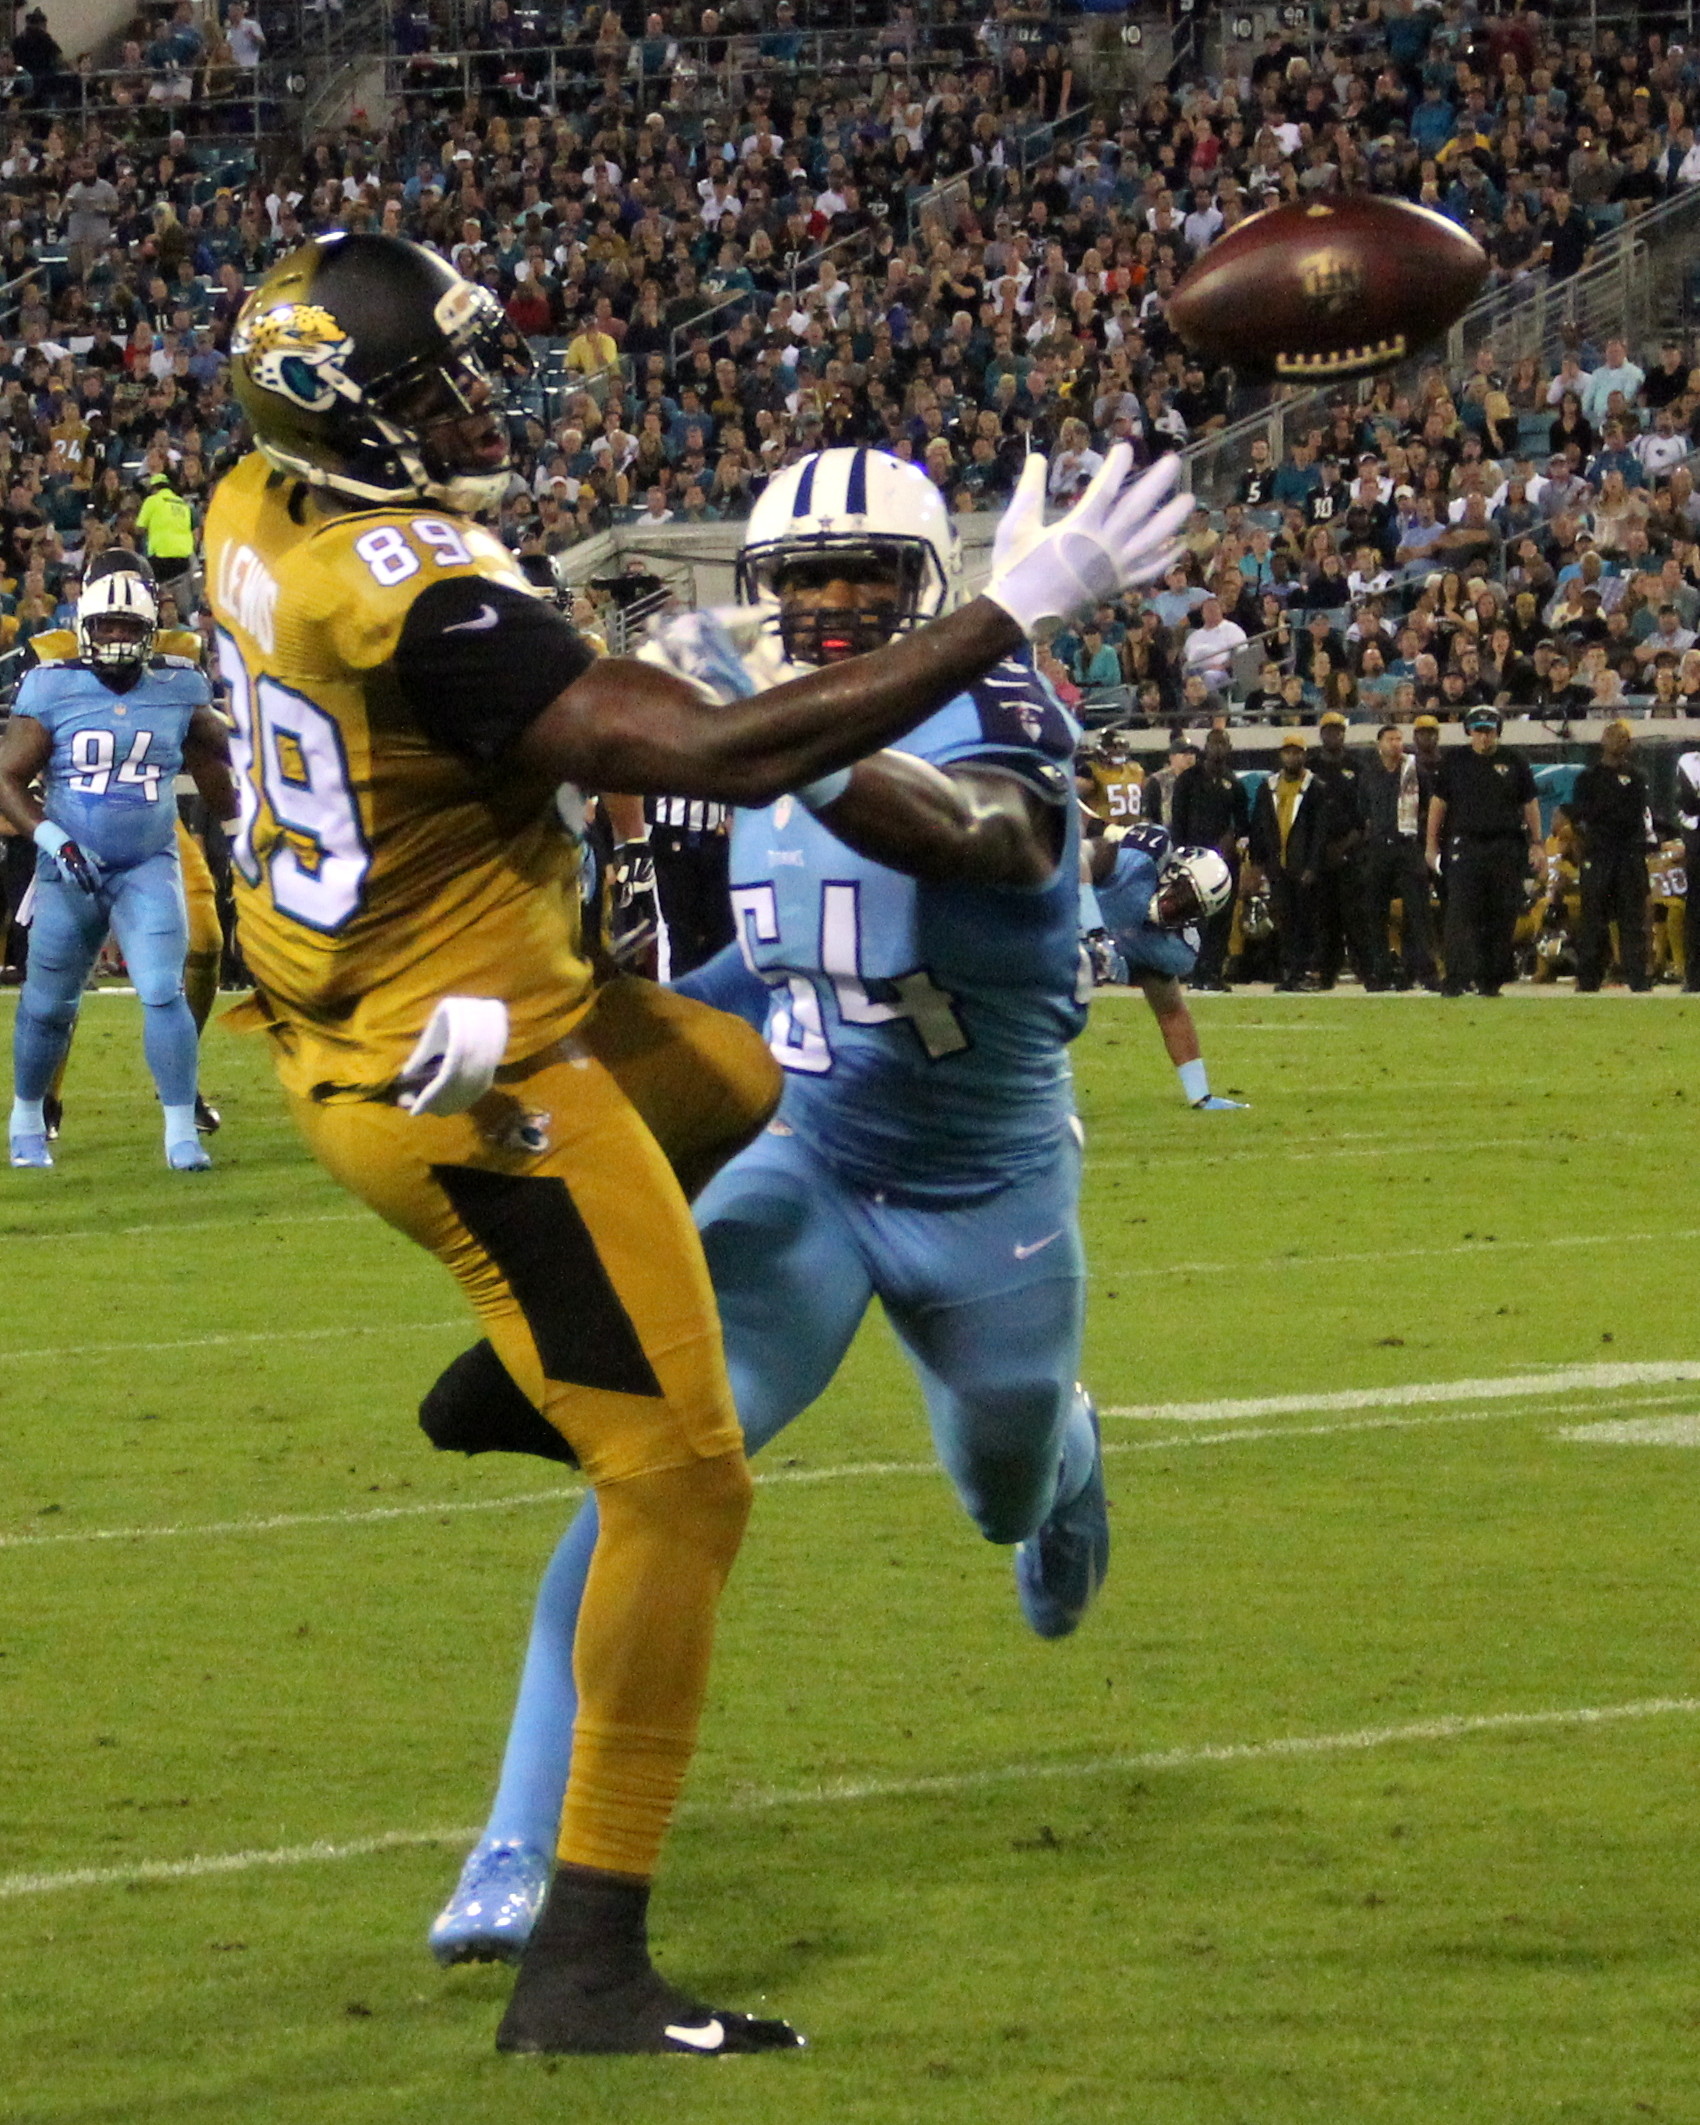 Rookie Rashad Greene’s 63 yard punt return set up a 5-yard scoring pass from QB Blake Bortles to tight end Julius Thomas, No. 80,  with 3:30 to play in the game and seal a 19-13 win over Tennessee. (Photo by Nancy Beecher).